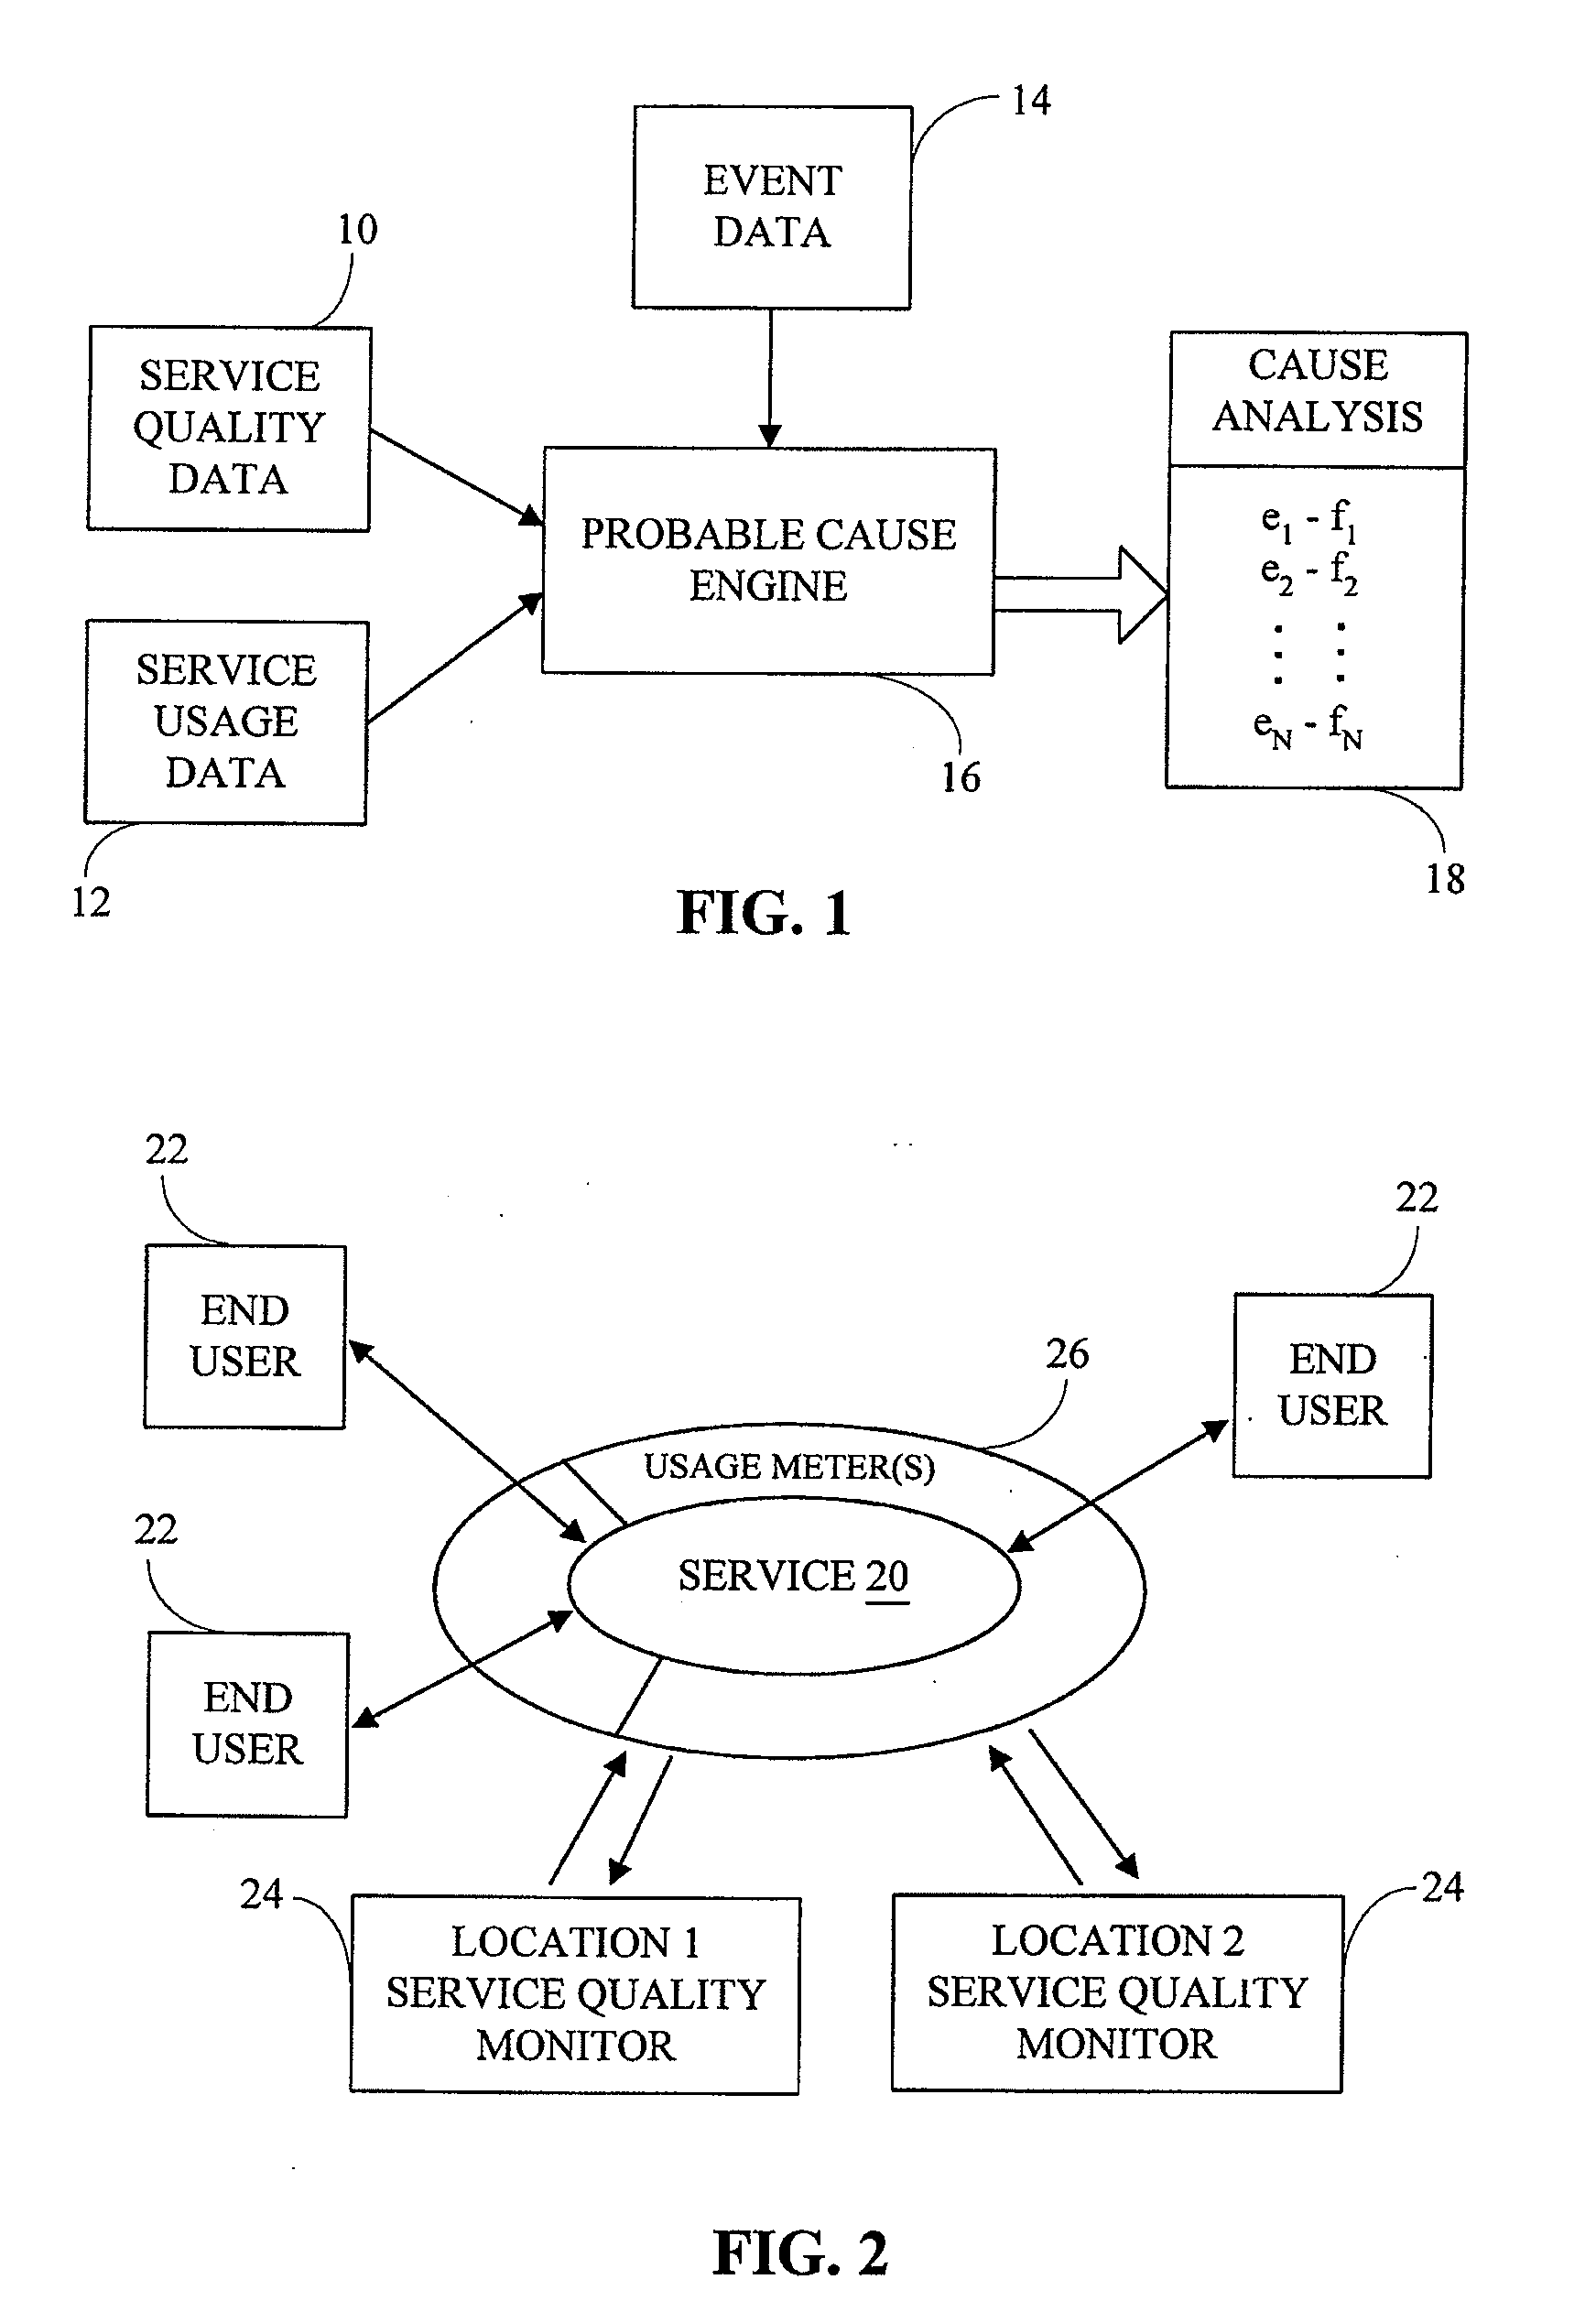 Method and System for Predicting Causes of Network Service Outages Using Time Domain Correlation